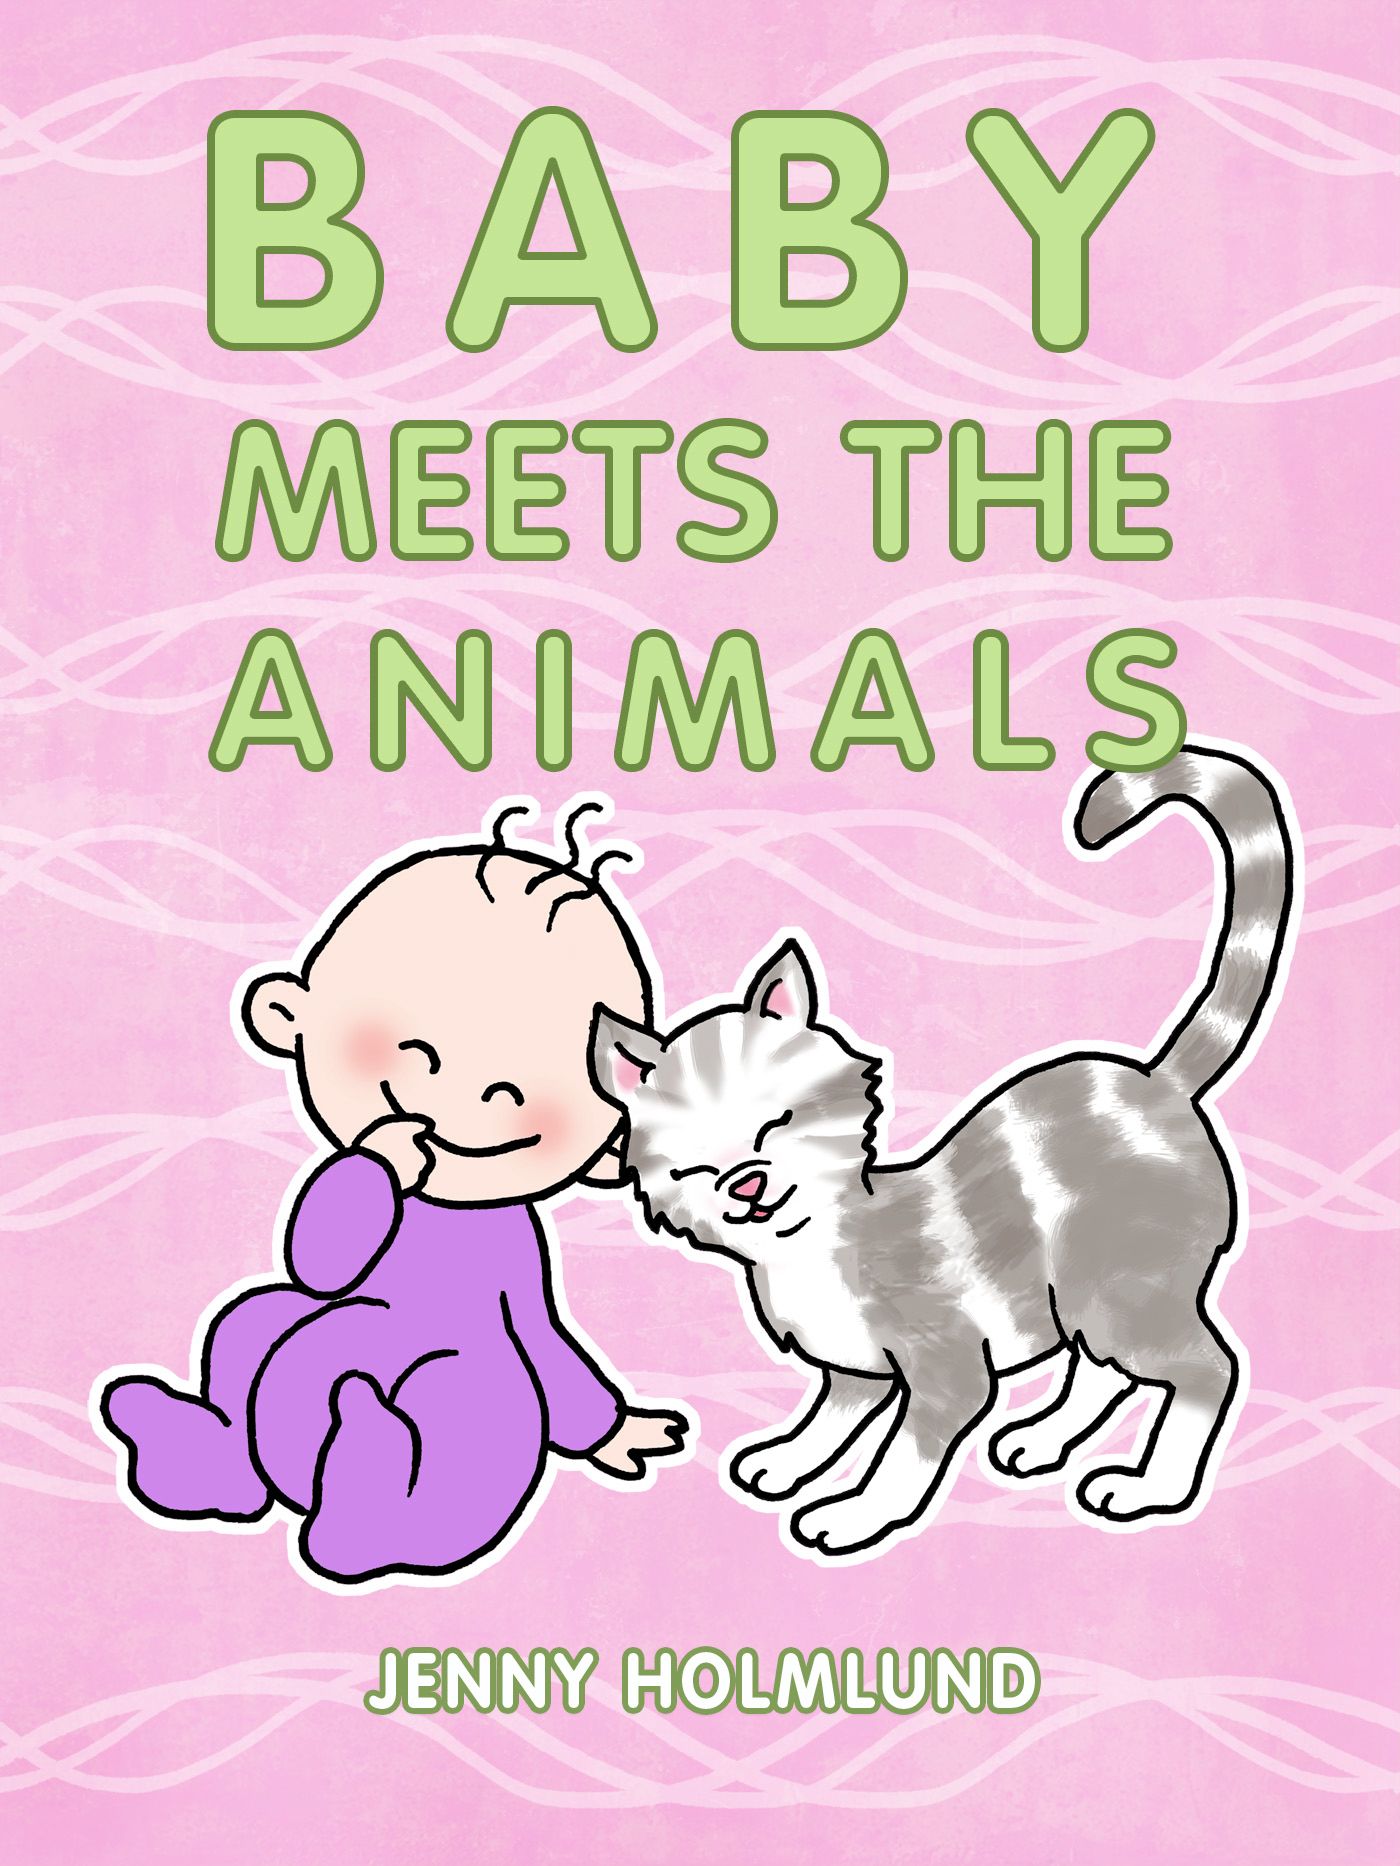 Baby Meets the Animals, eBook by Jenny Holmlund